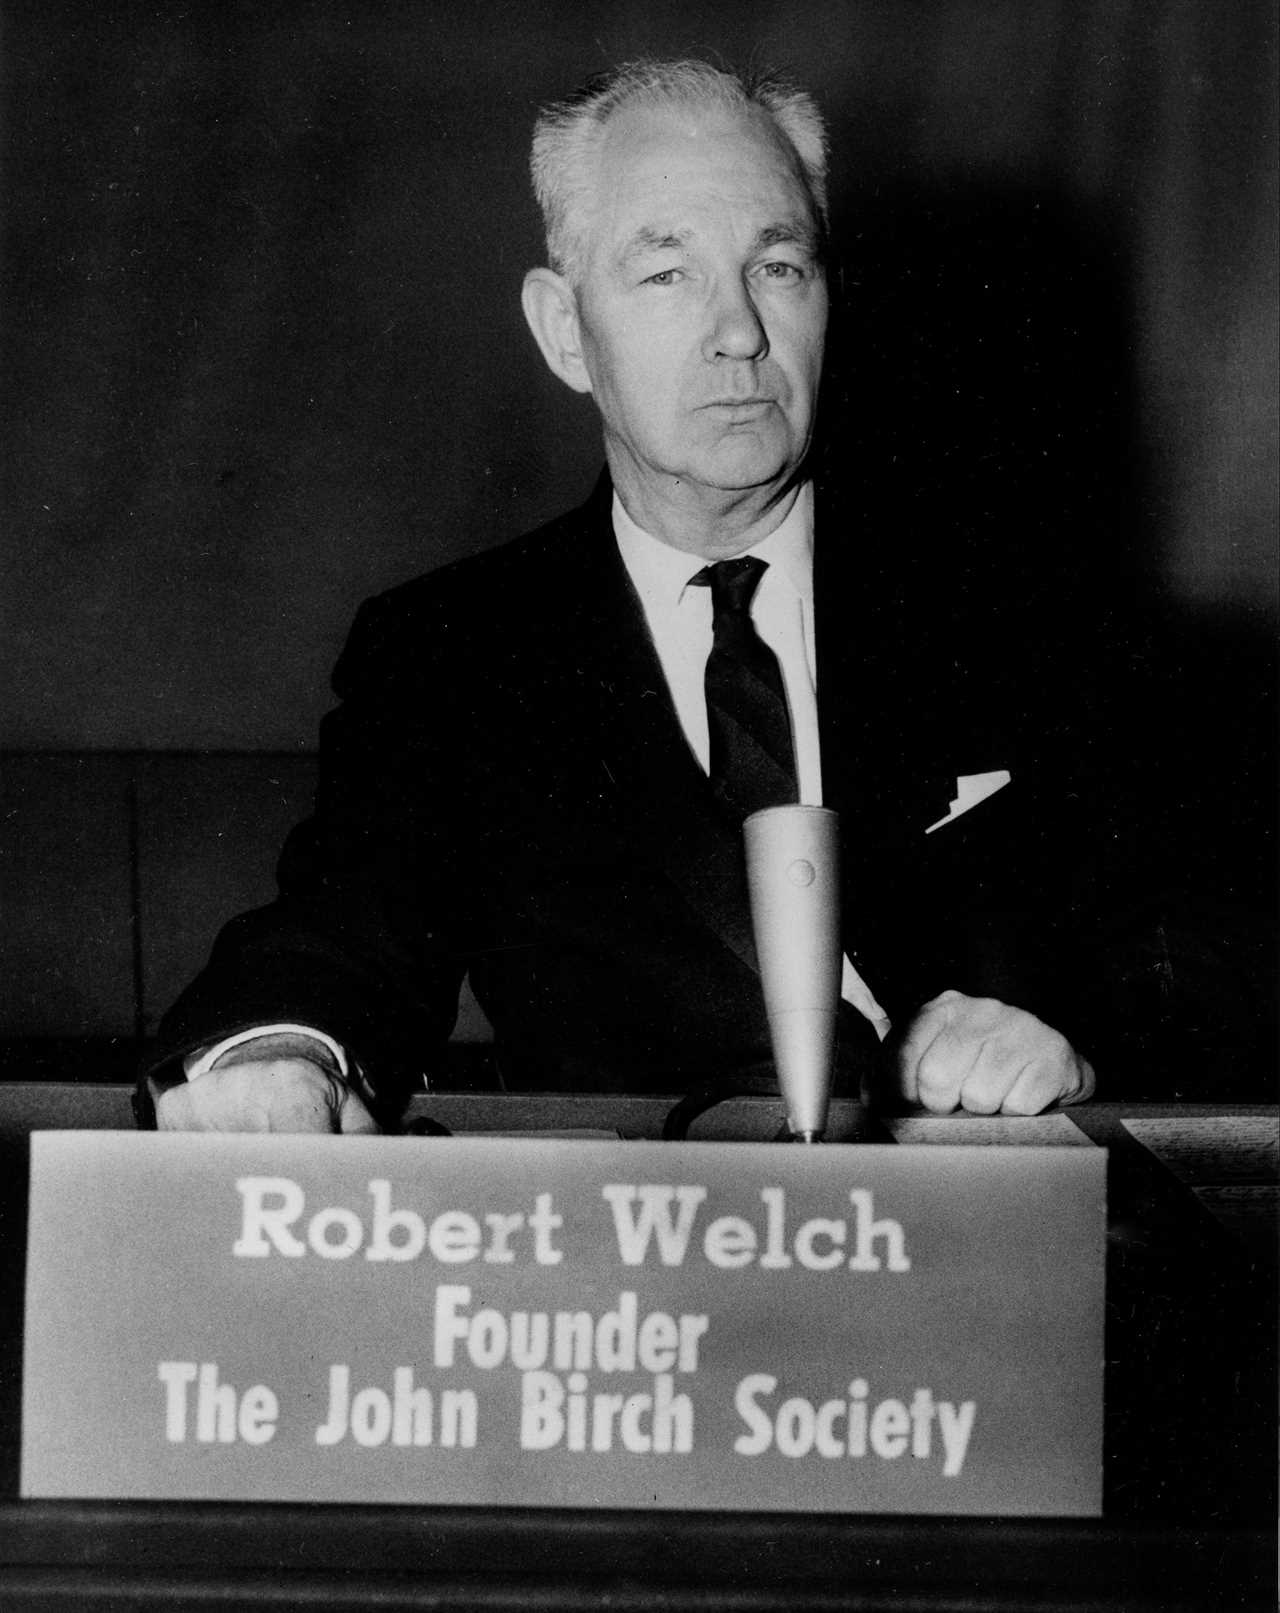 The Truth About William F. Buckley & the John Birch Society